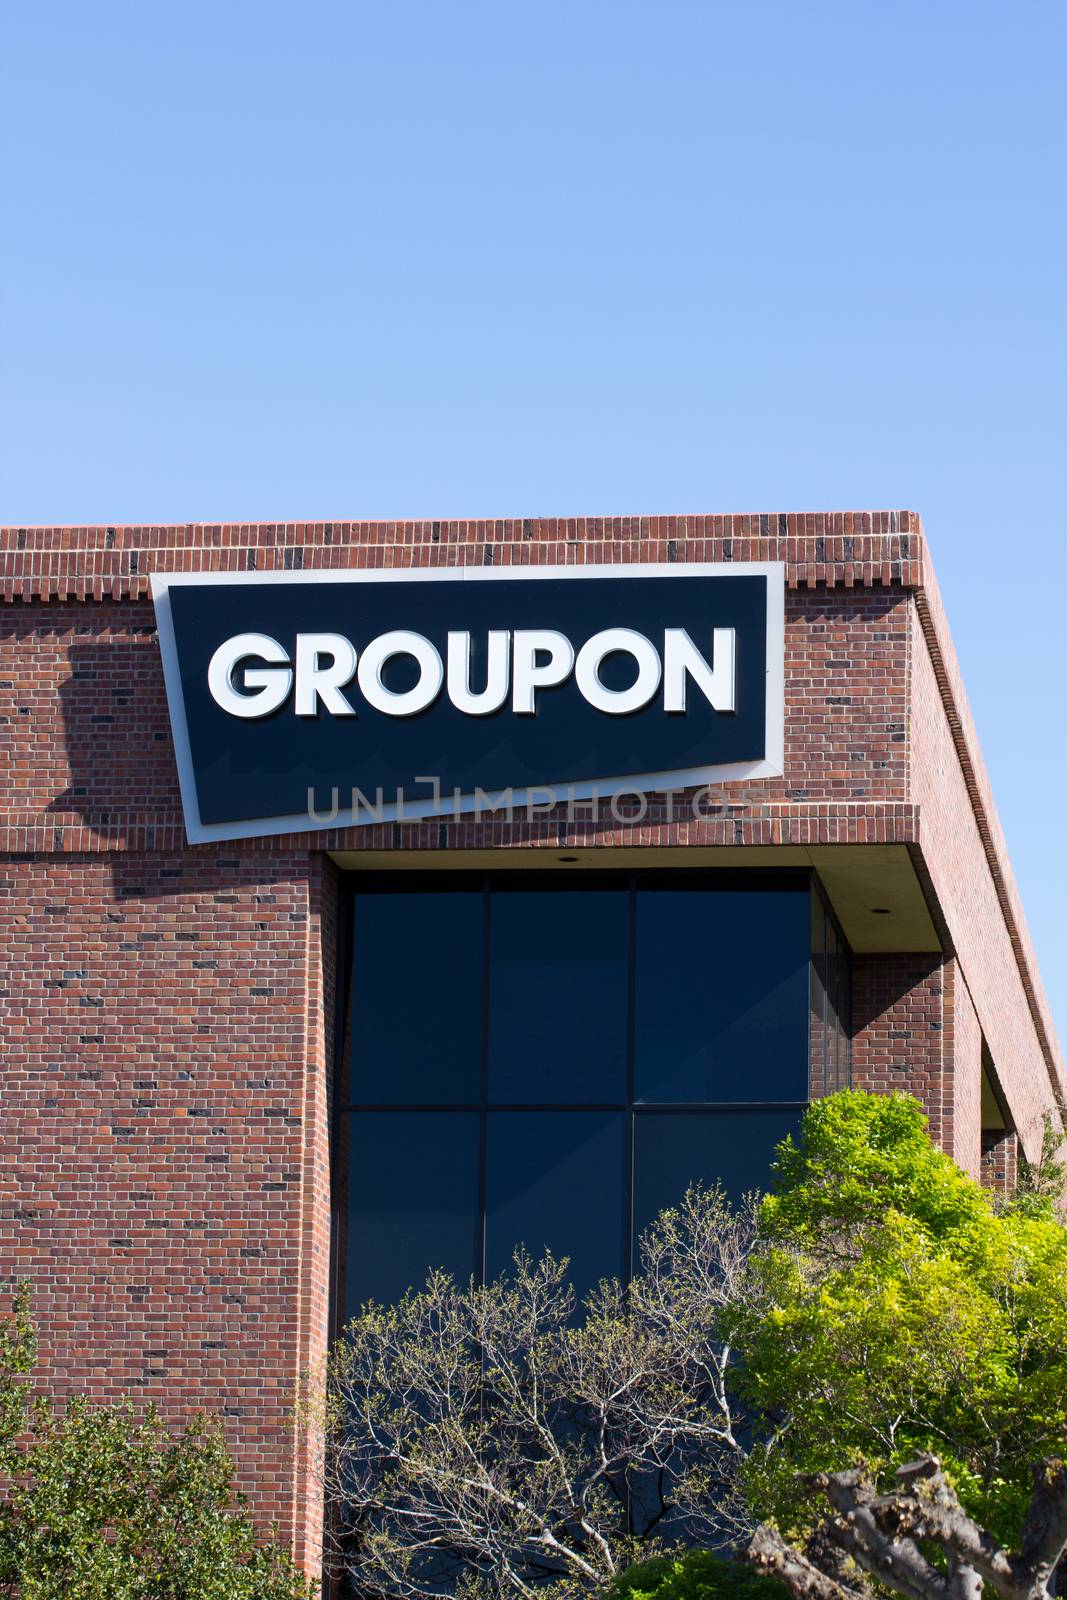 PALO ALTO, CA/USA - MARCH 16, 2014: Groupon offices in Silicon Valley. Groupon is a an on-line website that features discounted gift certificates usable at local or national companies.